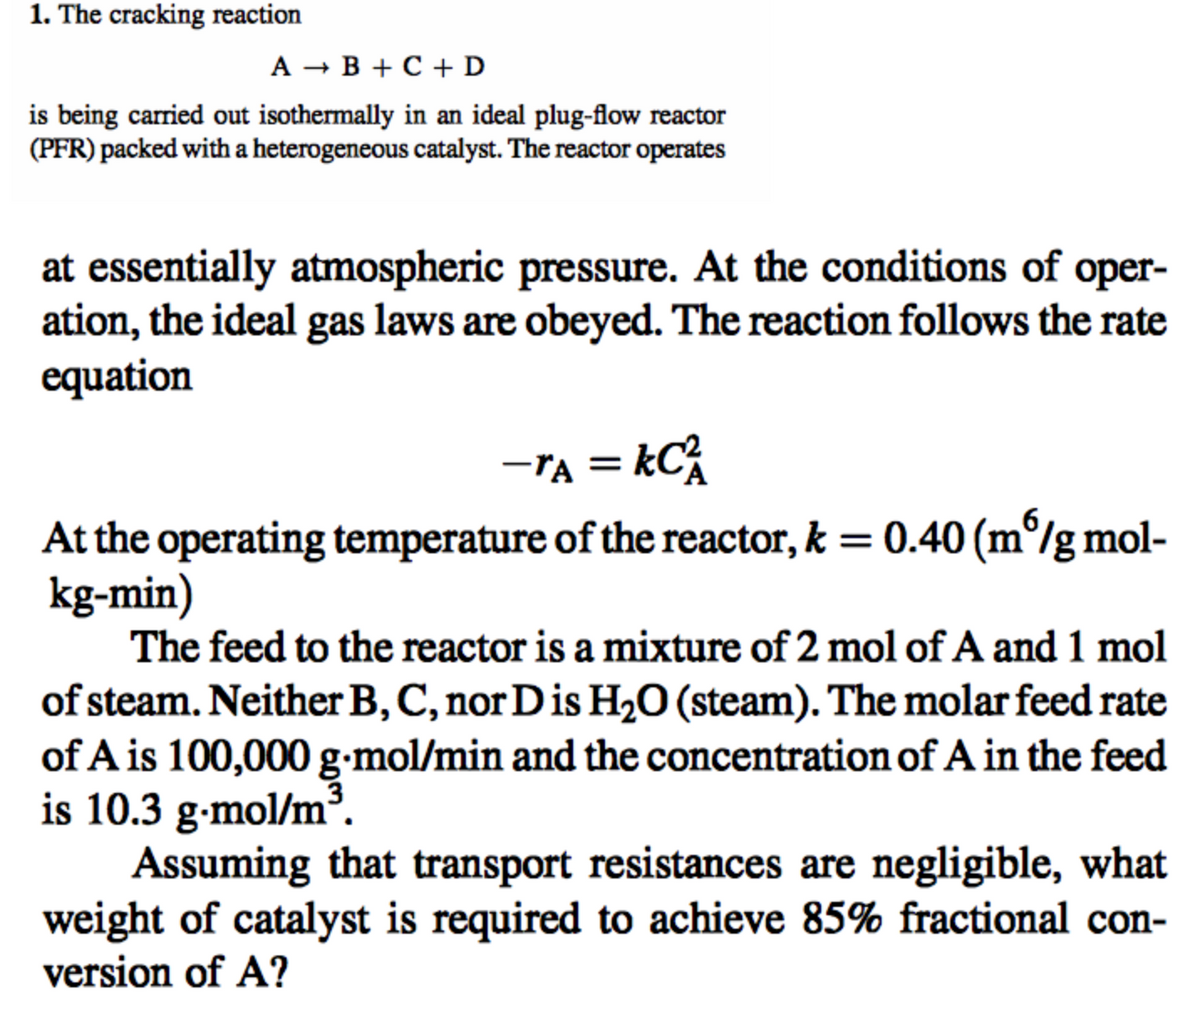 1. The cracking reaction
A → B + C + D
is being carried out isothermally in an ideal plug-flow reactor
(PFR) packed with a heterogeneous catalyst. The reactor operates
at essentially atmospheric pressure. At the conditions of oper-
ation, the ideal gas laws are obeyed. The reaction follows the rate
equation
-TA = KC²
At the operating temperature of the reactor, k = 0.40 (m/g mol-
kg-min)
The feed to the reactor is a mixture of 2 mol of A and 1 mol
of steam. Neither B, C, nor D is H₂O (steam). The molar feed rate
of A is 100,000 g-mol/min and the concentration of A in the feed
is 10.3 g-mol/m³.
Assuming that transport resistances are negligible, what
weight of catalyst is required to achieve 85% fractional con-
version of A?